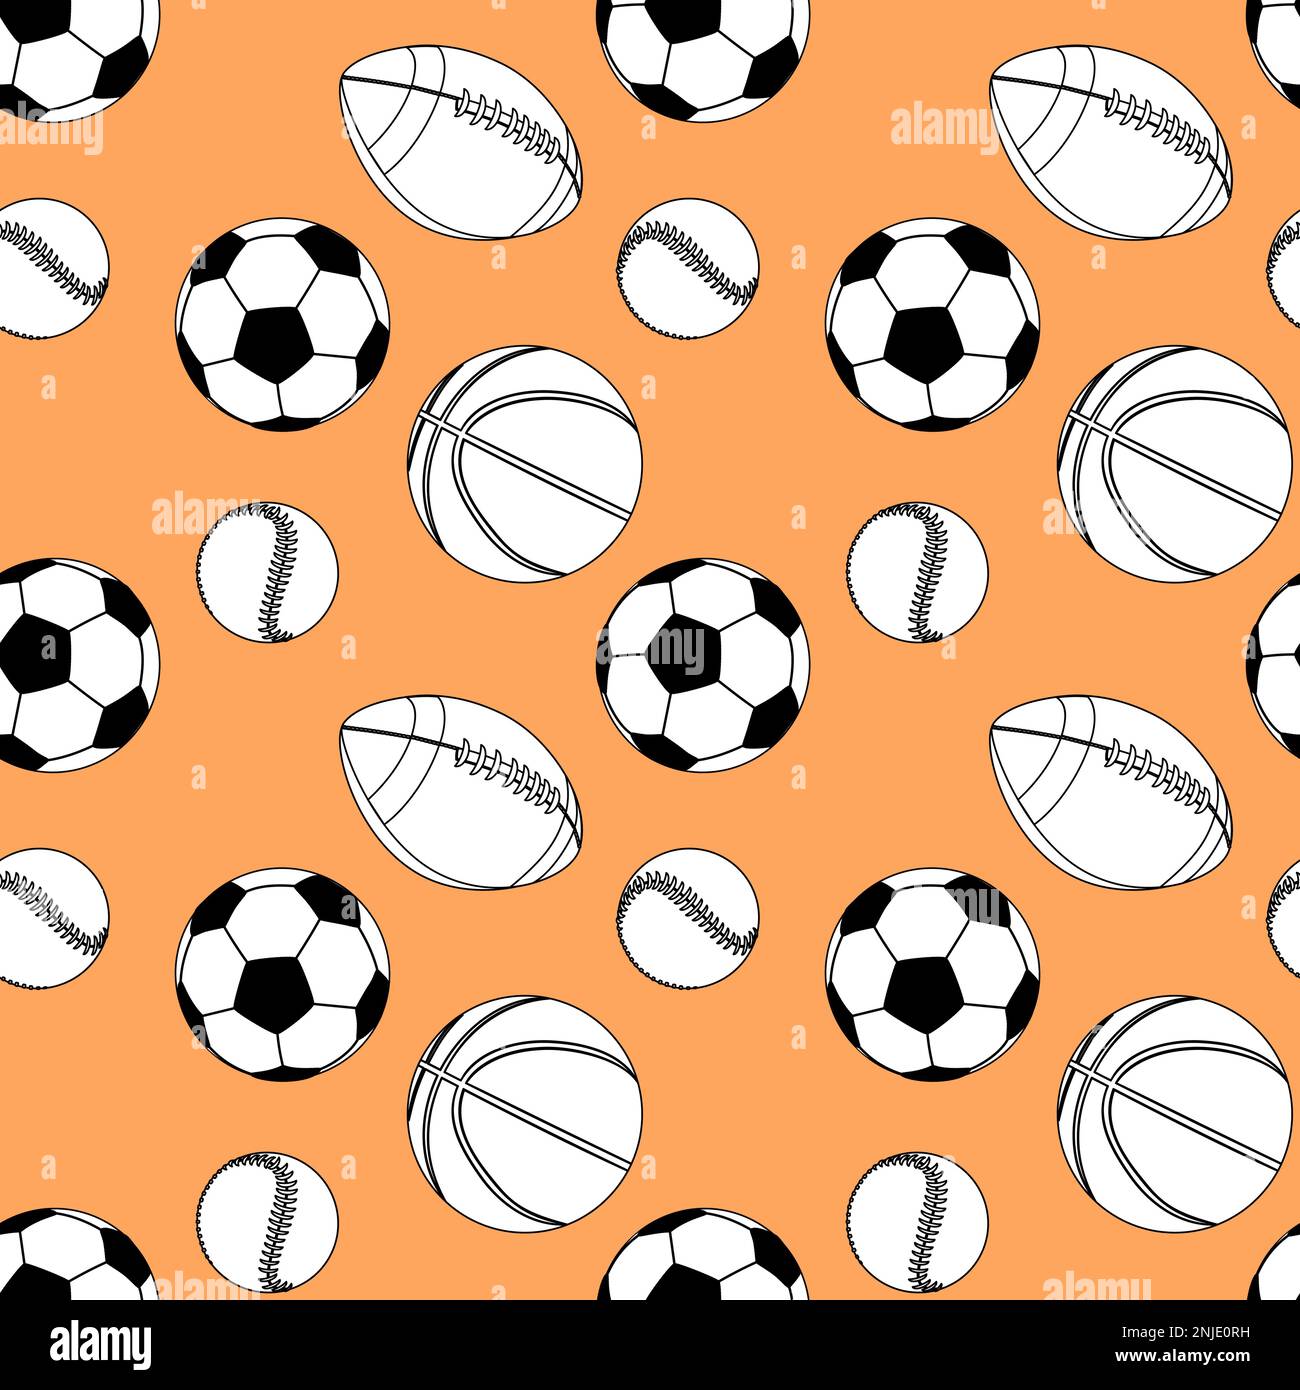 Seamless vector pattern with sport balls on an orange background Stock Vector